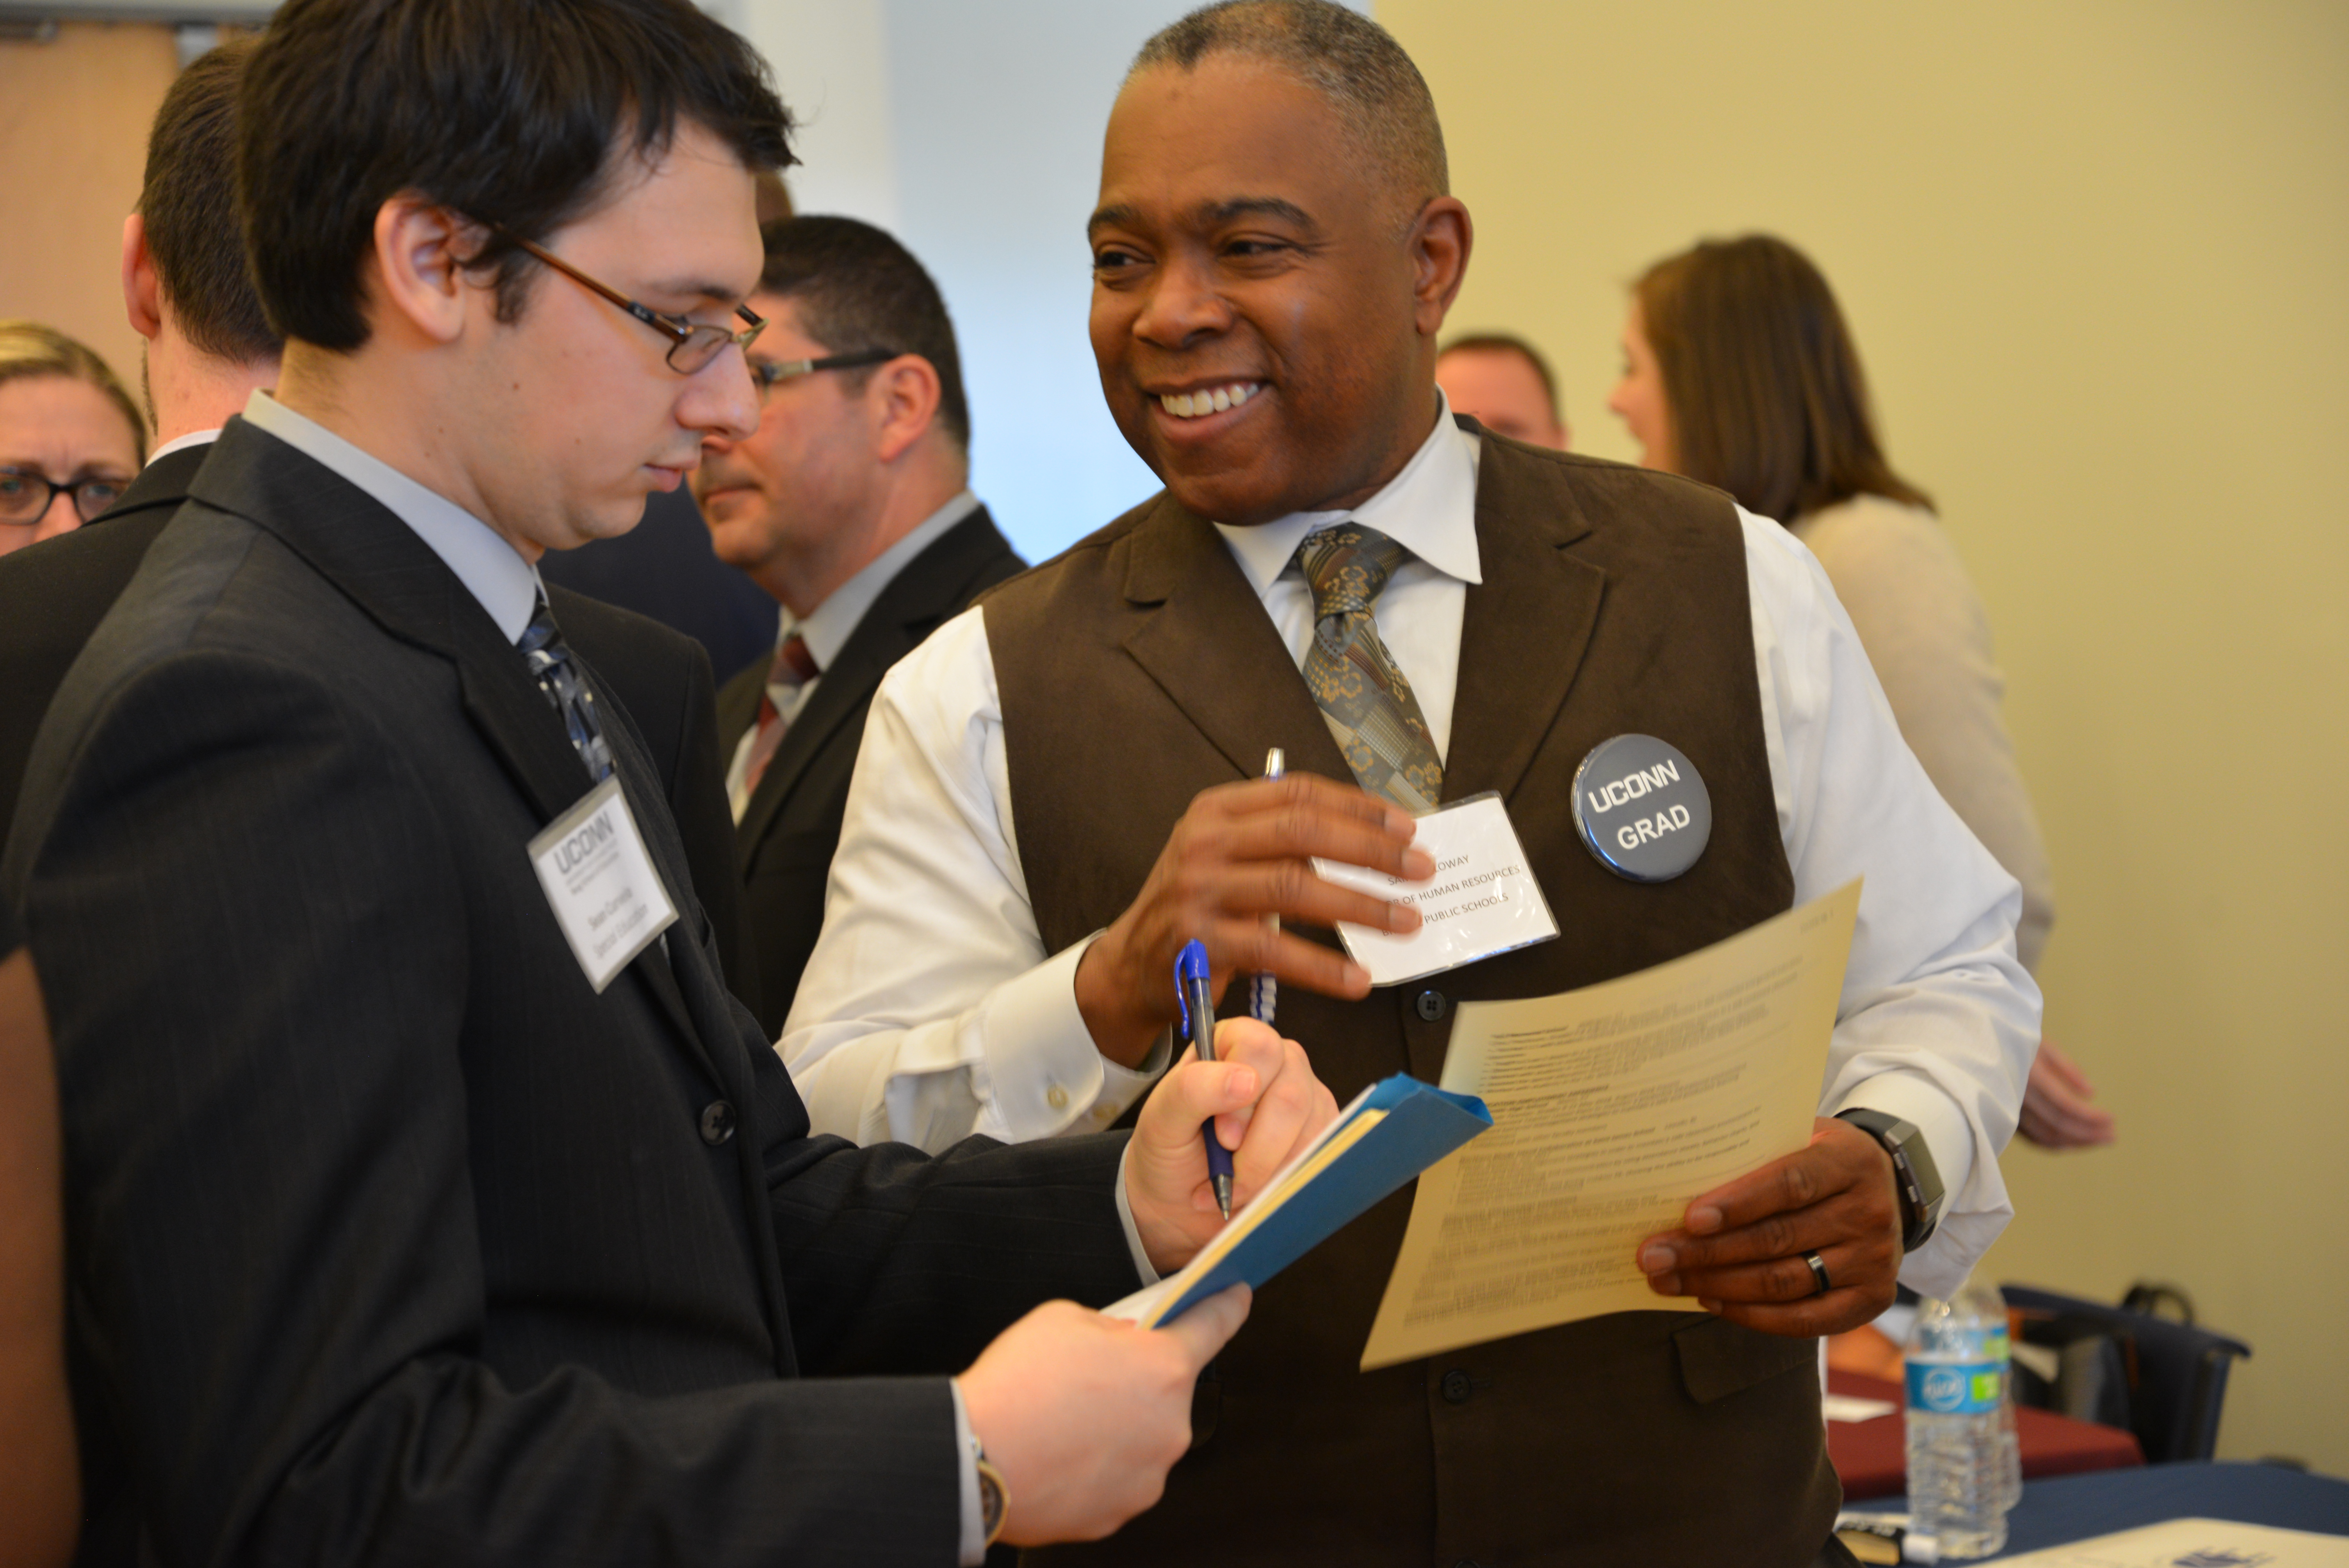 Samuel Galloway ’01 6th Year, director of human resources at Bristol Public Schools, reviews a student’s resume during the Education Career Fair. (Shawn Kornegay/Neag School)